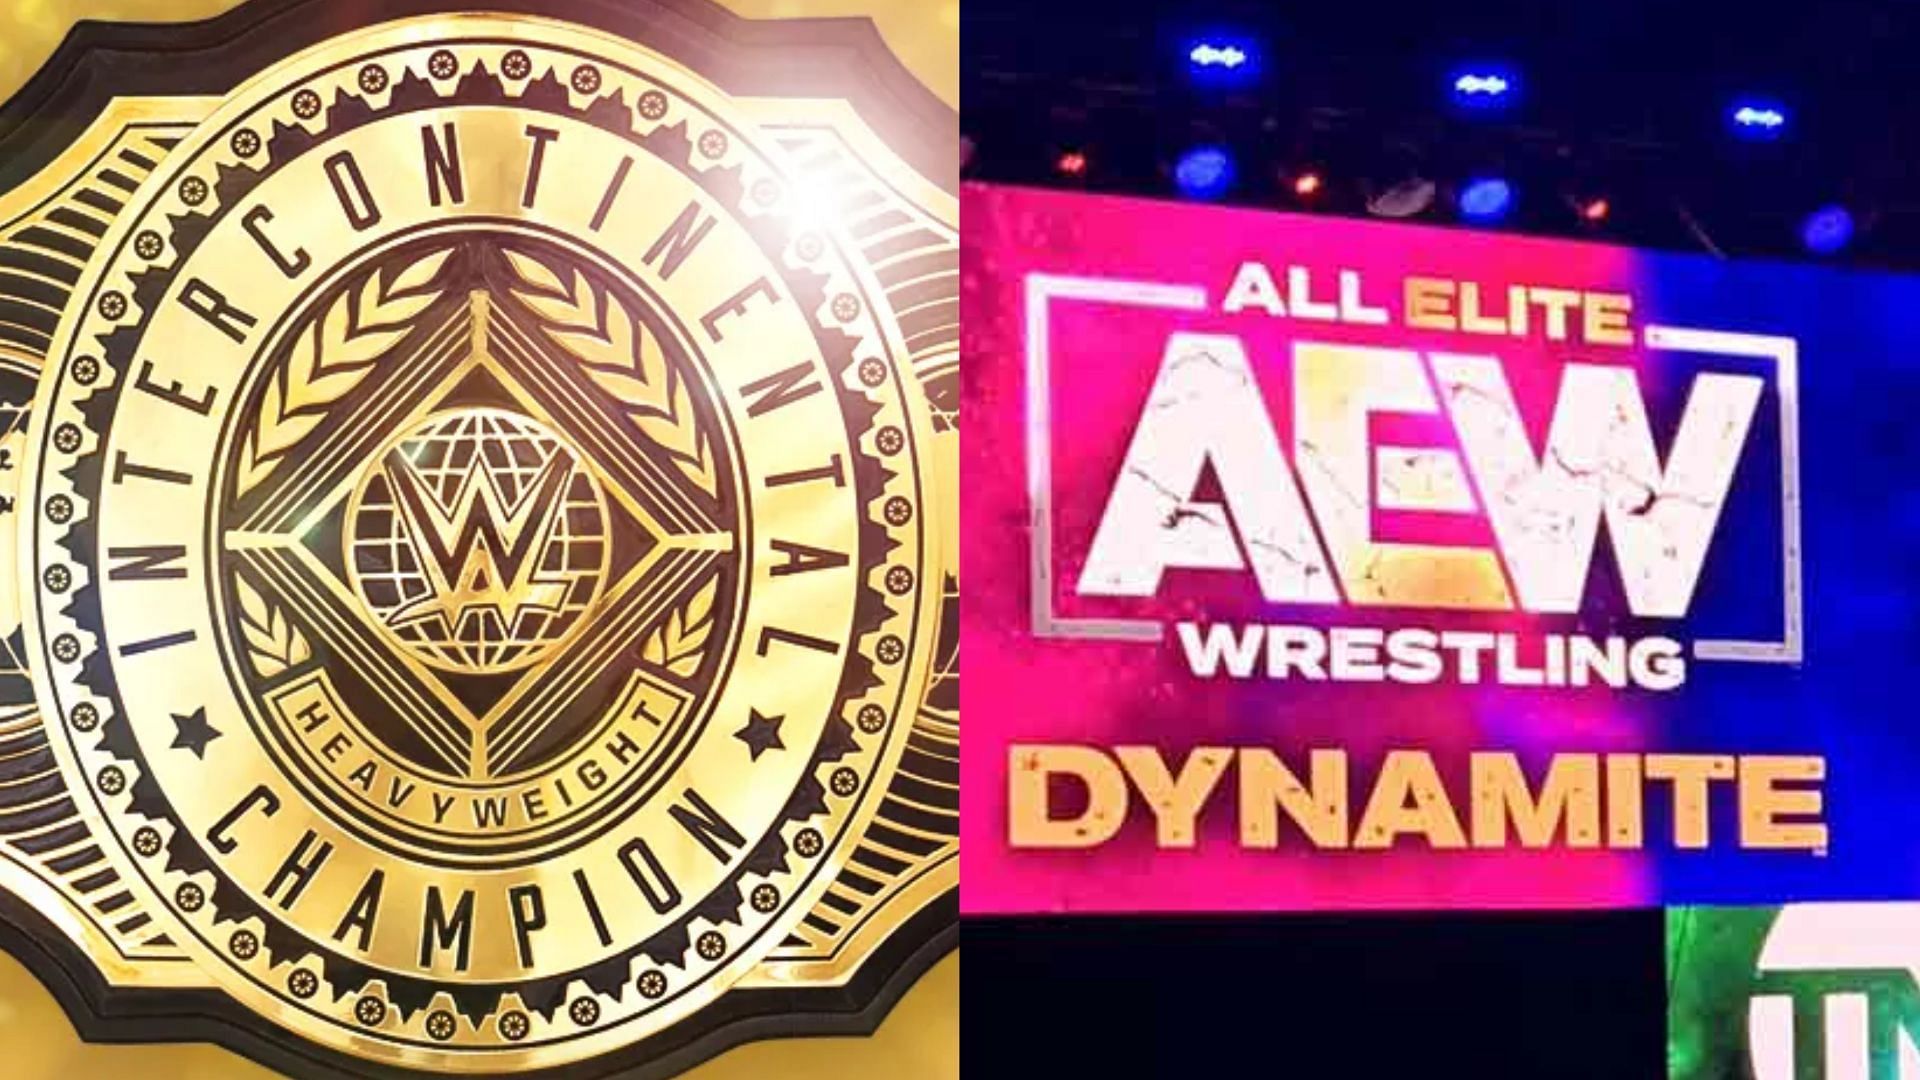 Which former WWE Intercontinental Champion would be interested in joining AEW?